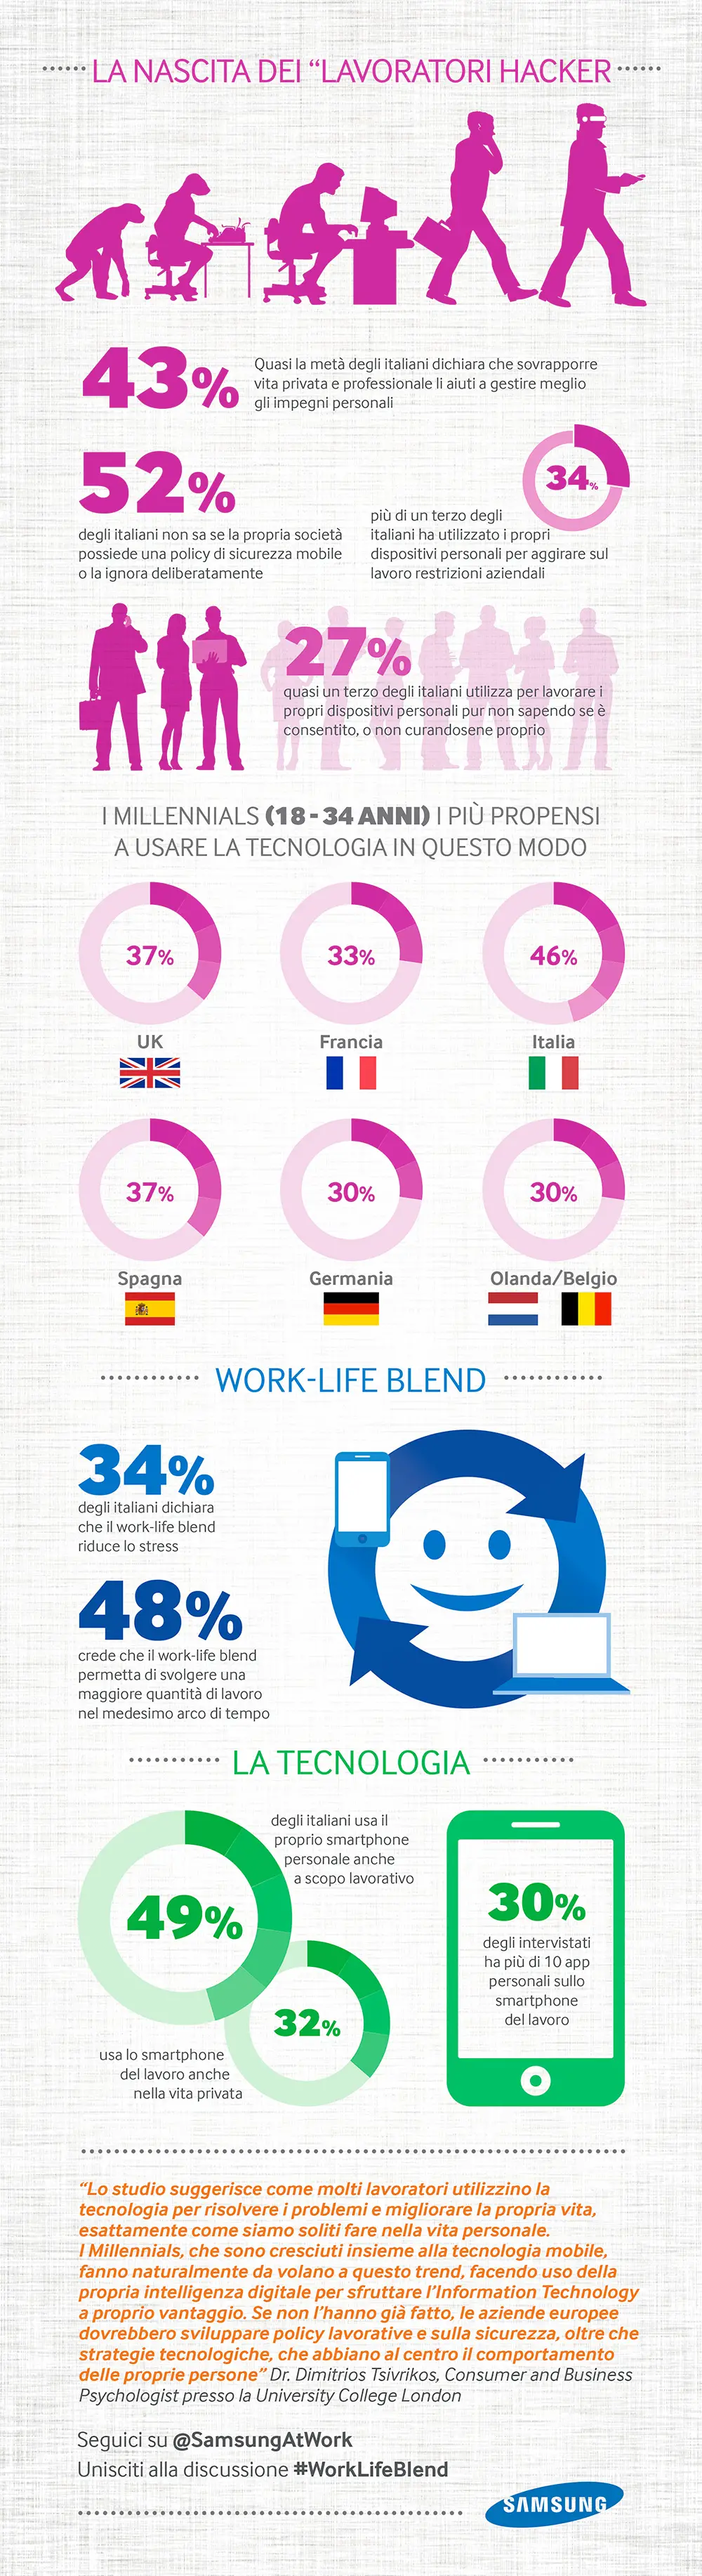 work-life-blend-infographic